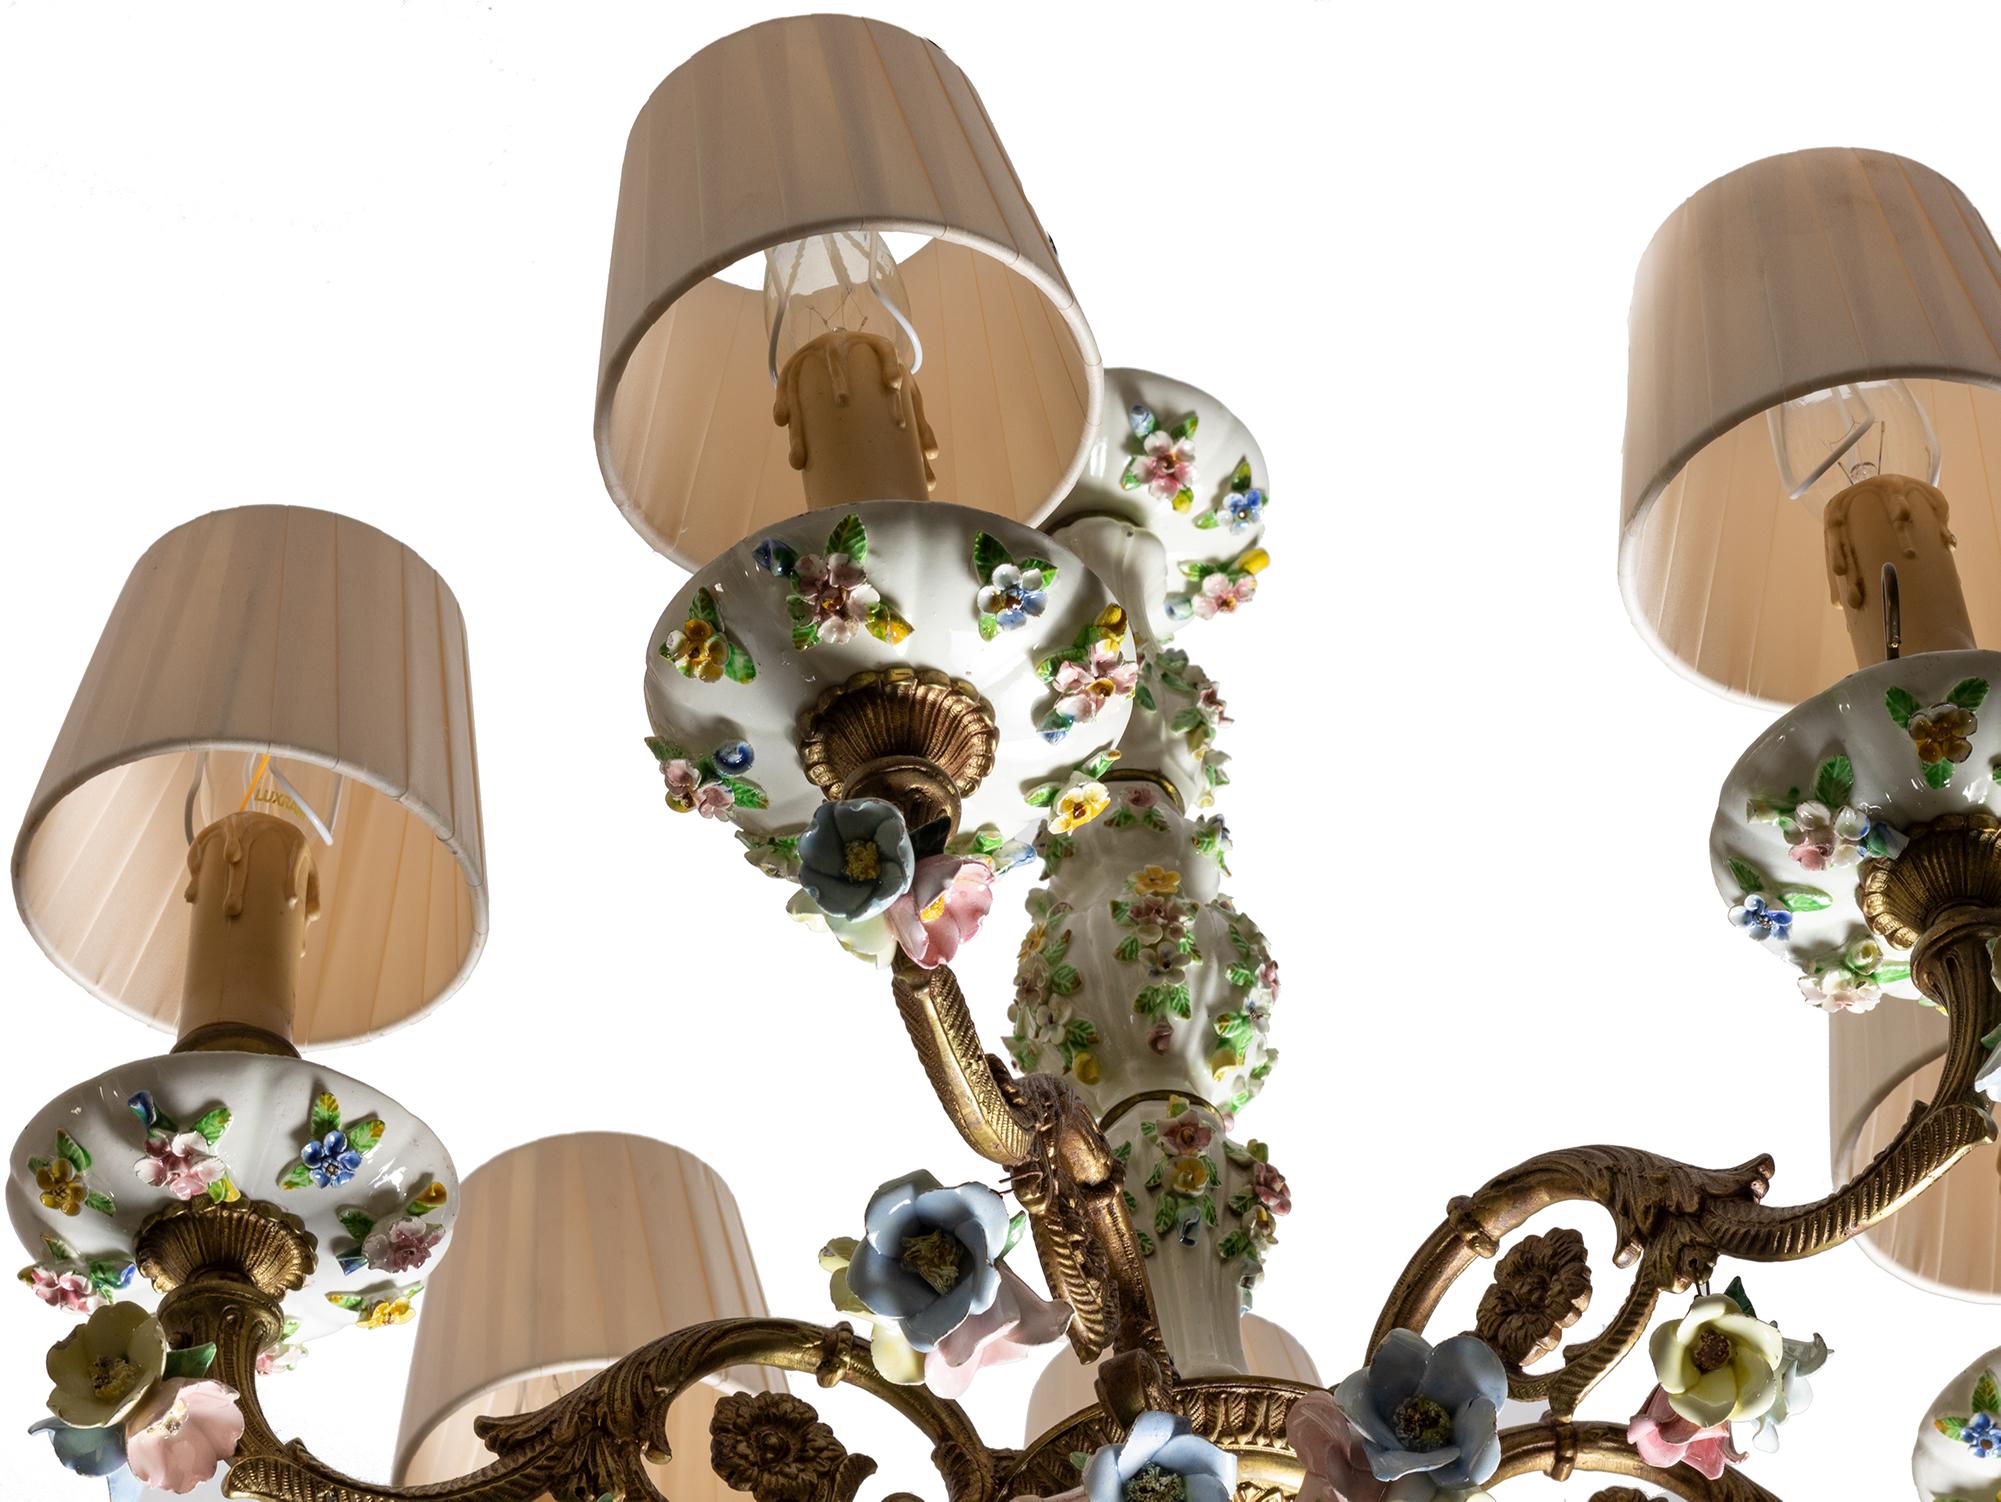 A Meissen styled white porcelain and bronze chandelier with six intricate bronze arms and hand-painted porcelain floral details in pink, blue, yellow and green details etched in the whitre porcelain and pink, blue, yellow and green petails ornating